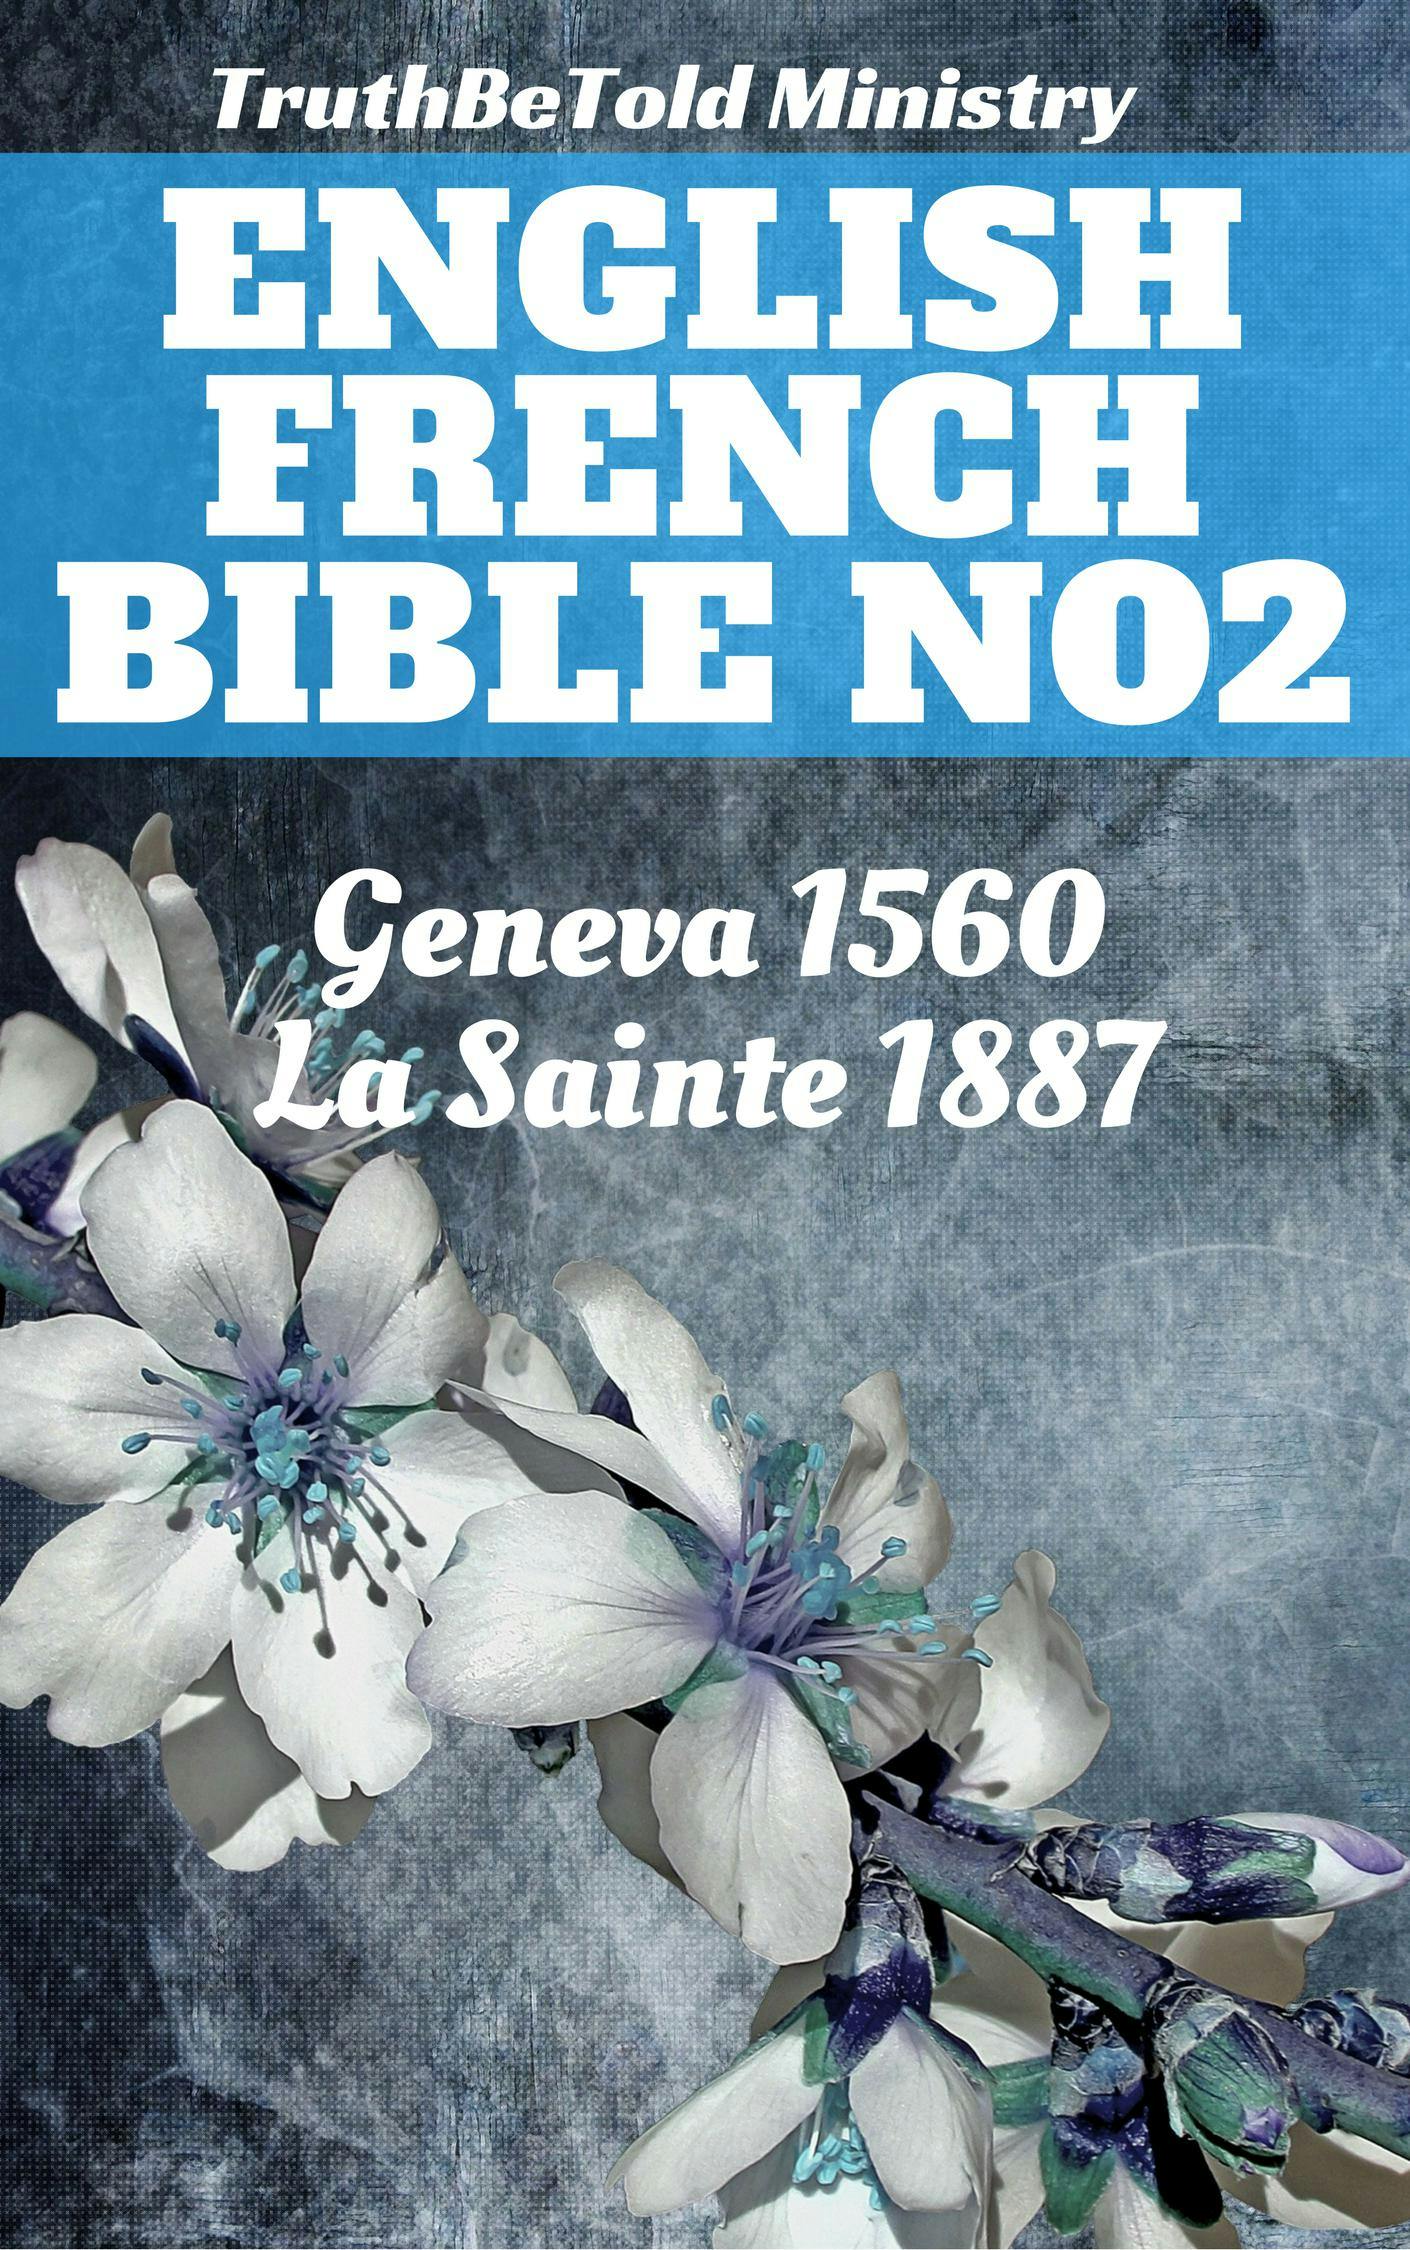 English French Bible No2 - William Cole, William Whittingham, TruthBeTold Ministry, Christopher Goodman, Jean Frederic Ostervald, Thomas Sampson, Joern Andre Halseth, Myles Coverdale, Anthony Gilby